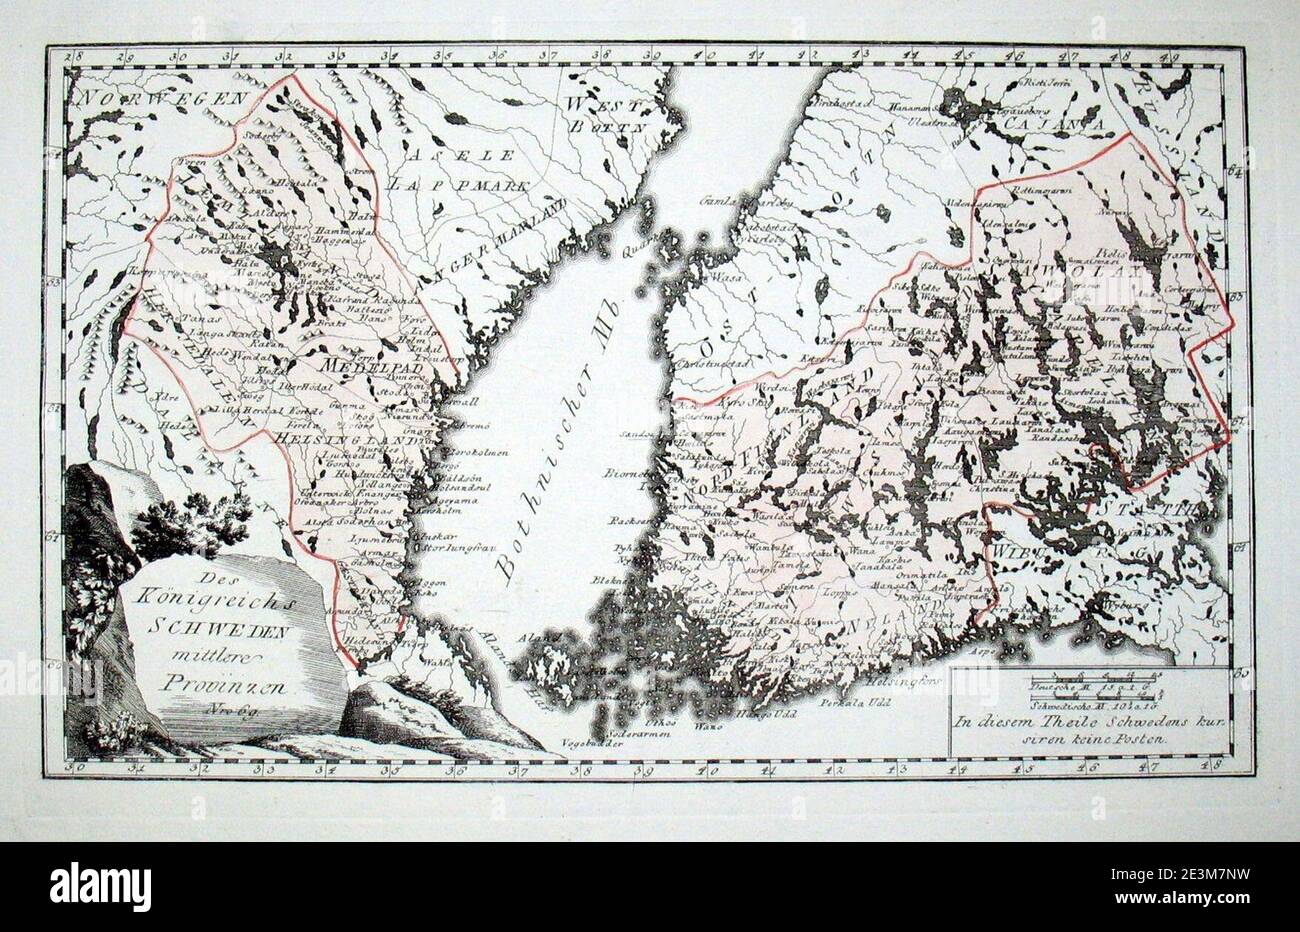 Map of Sweden in 1791 by Reilly 069. Stock Photo